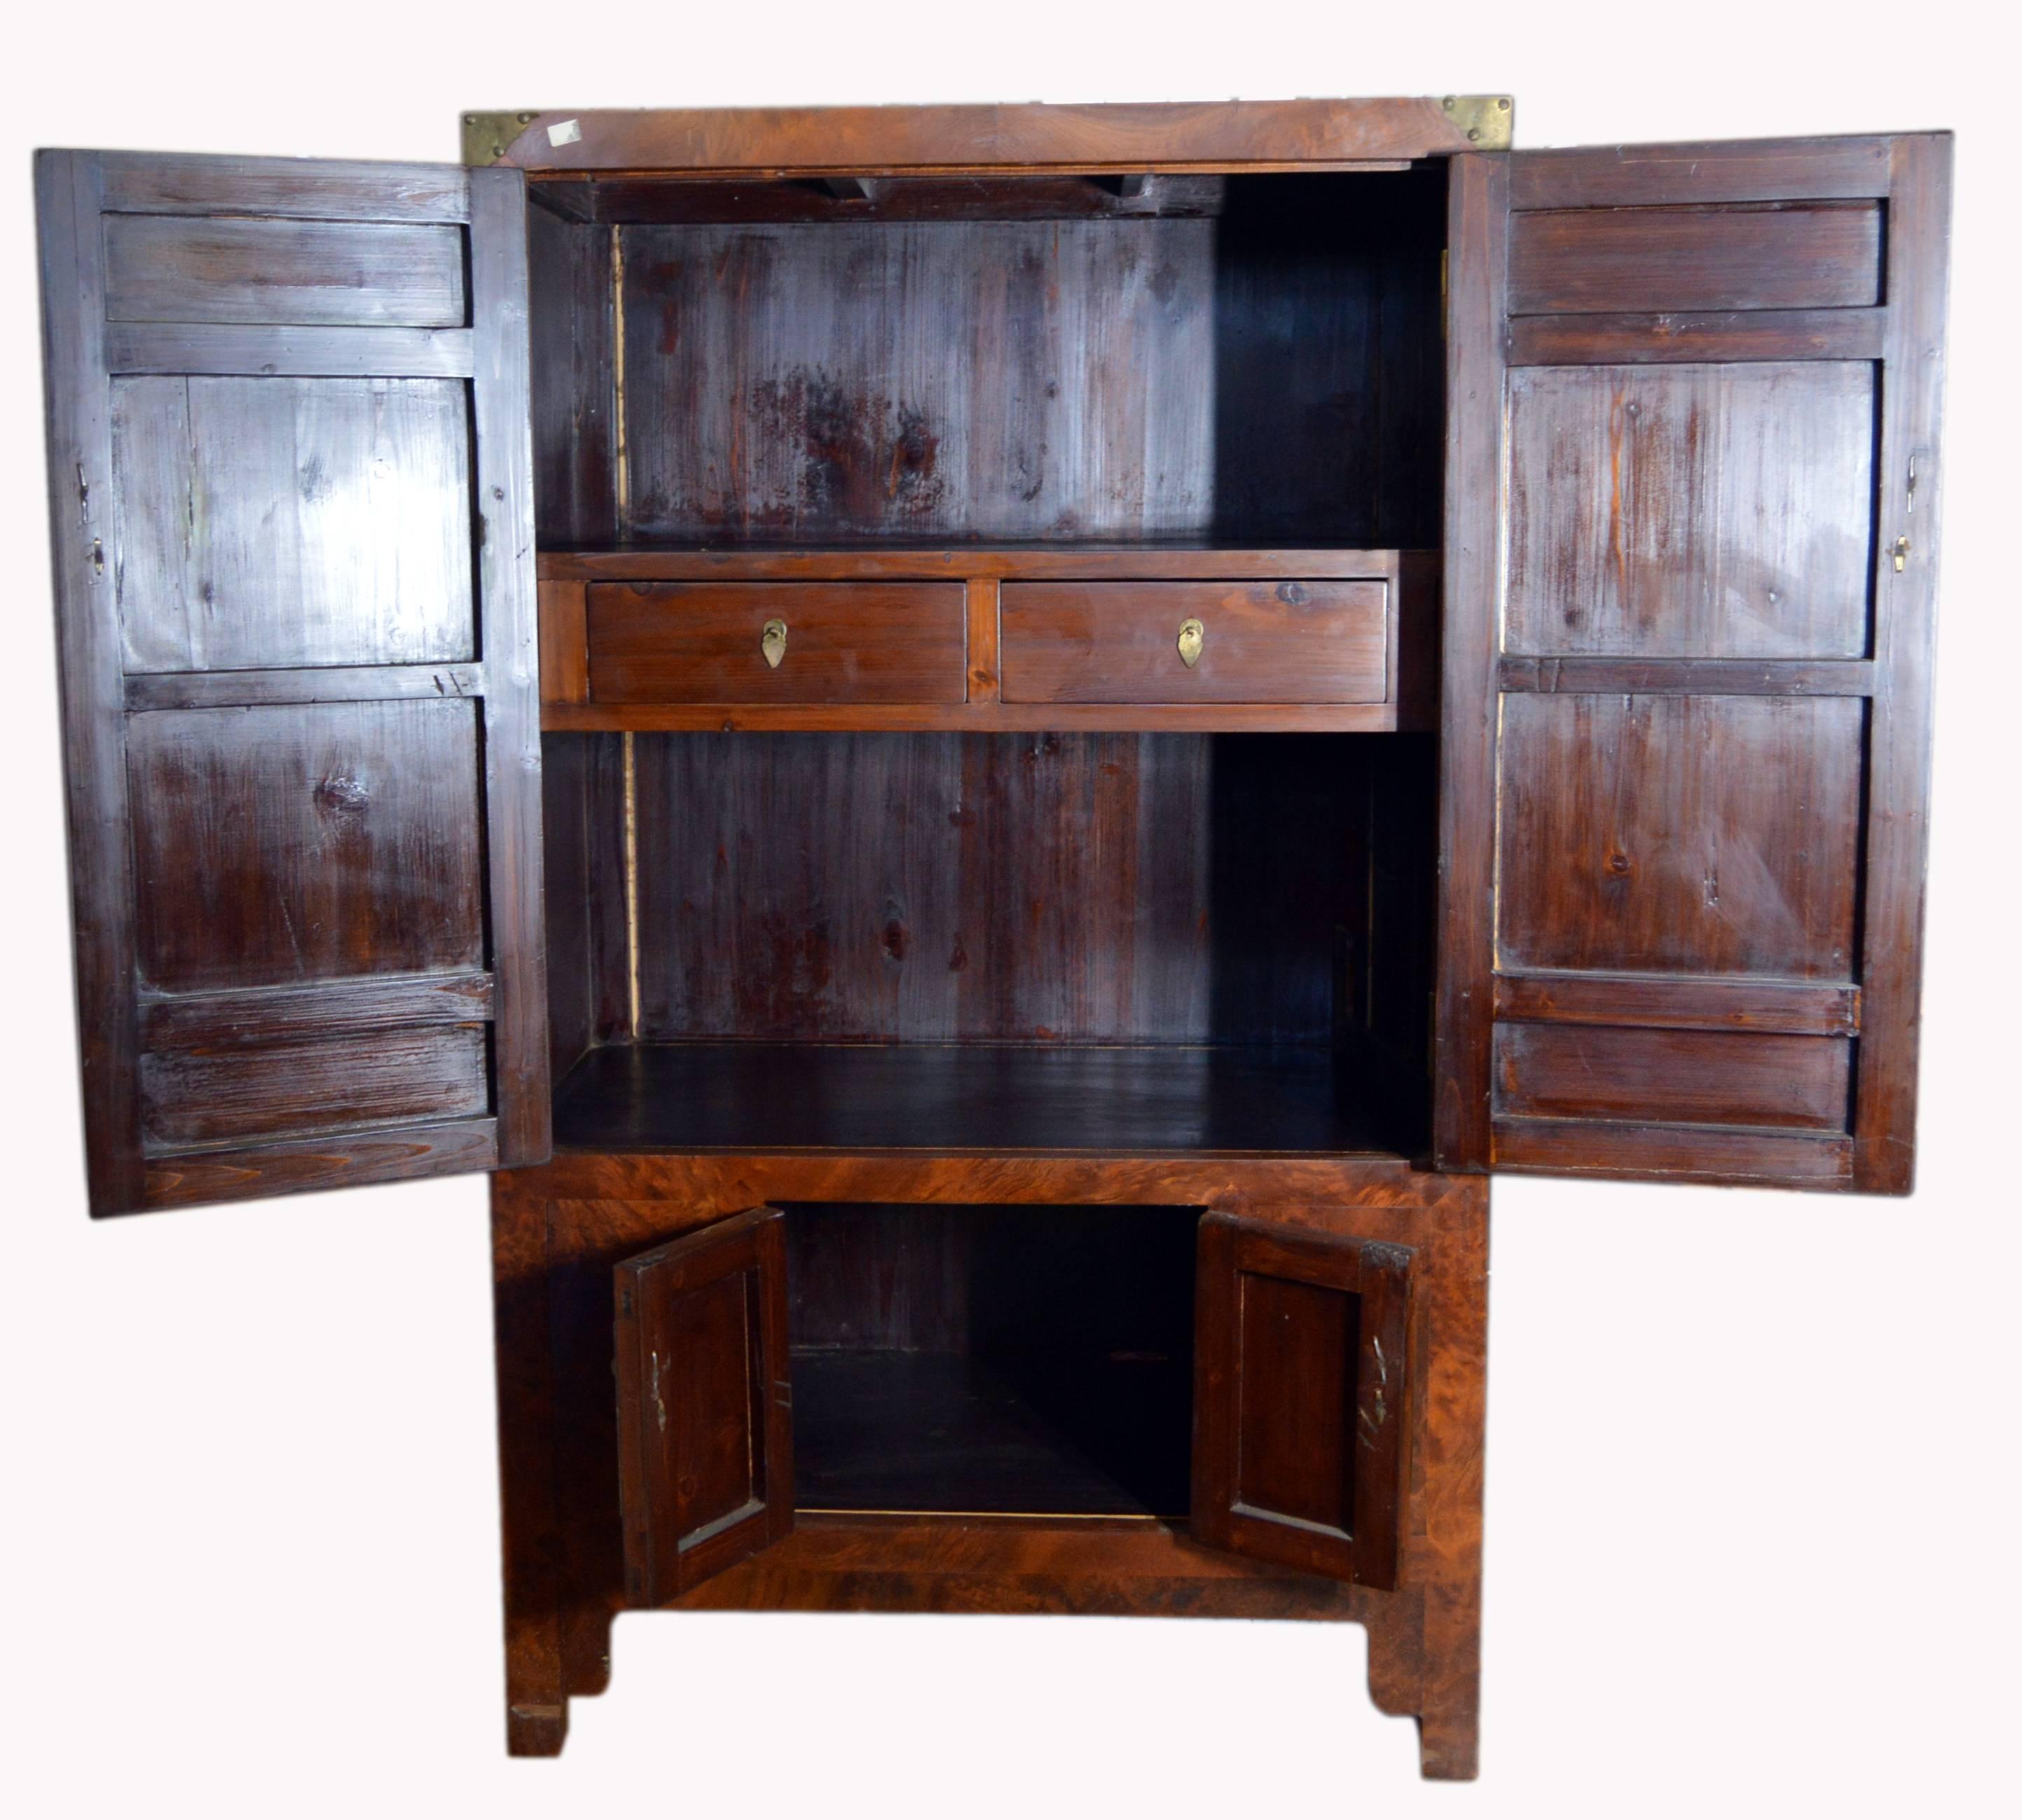 A Chinese 19th century four-door stained burlwood armoire with inner drawers and brass hardware. This exquisite Chinese armoire features a linear silhouette, adorned with two large doors in its upper section, accented with a large round brass plate